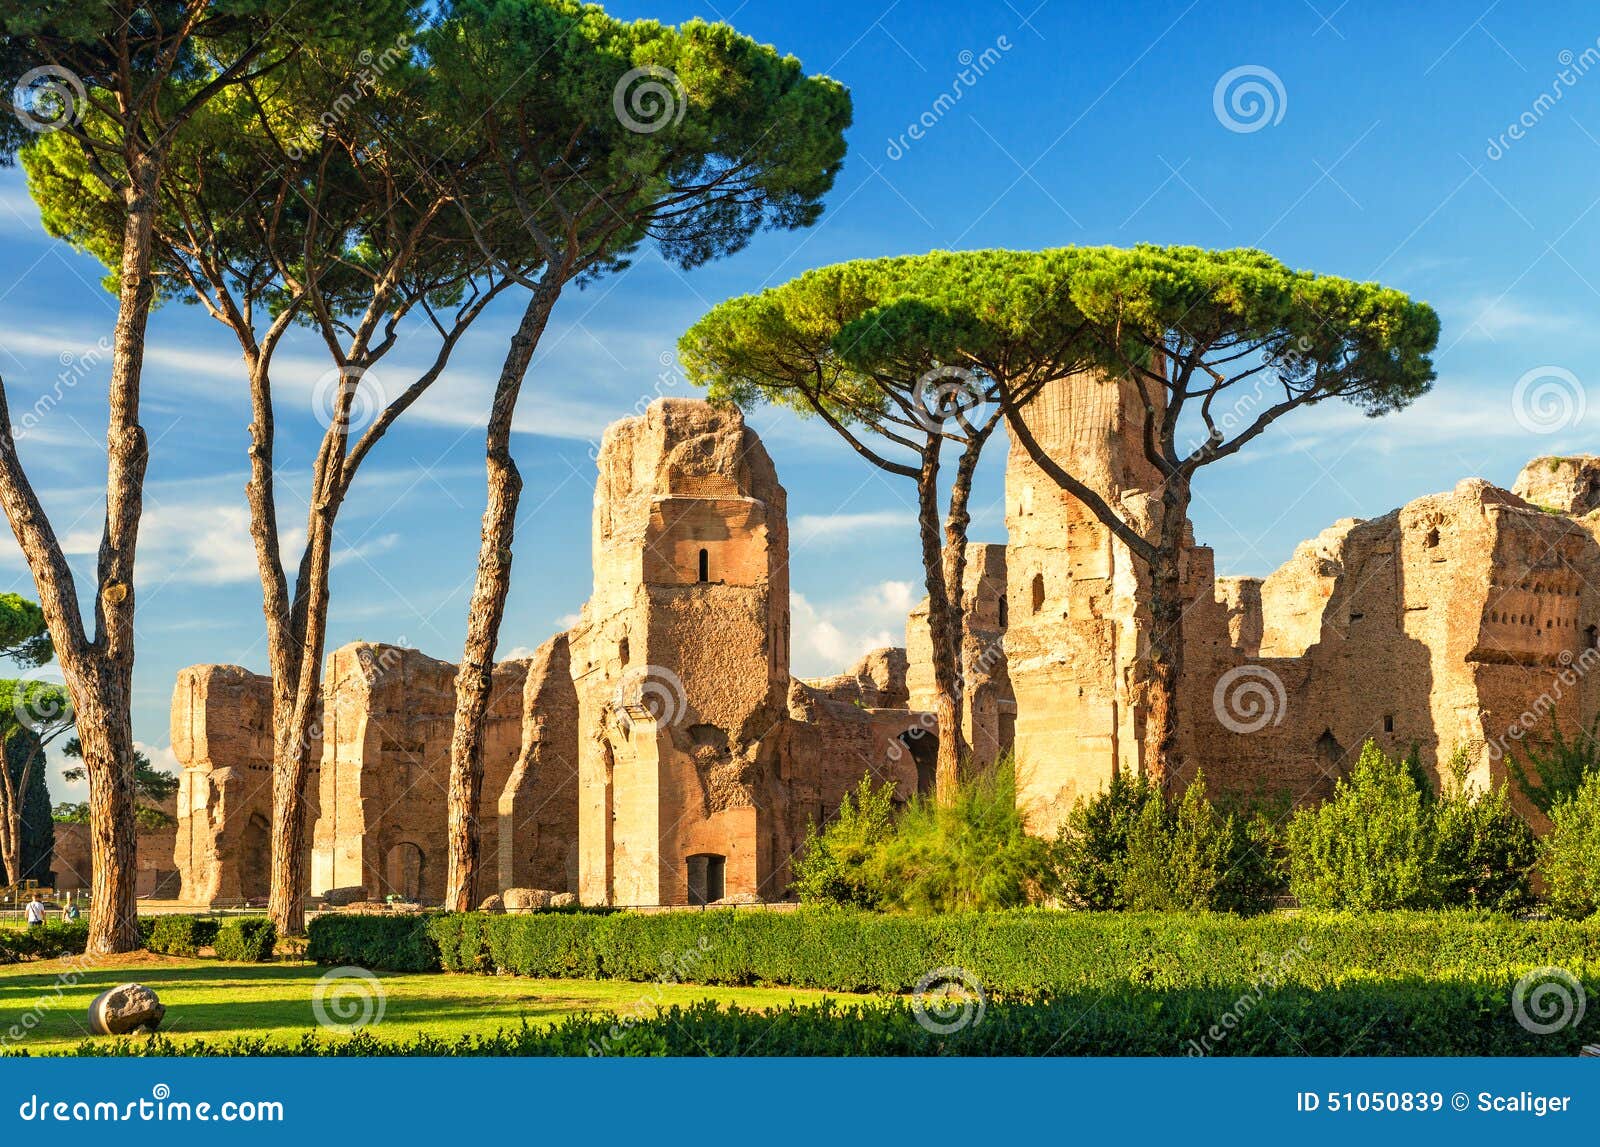 the ruins of the baths of caracalla in rome, italy